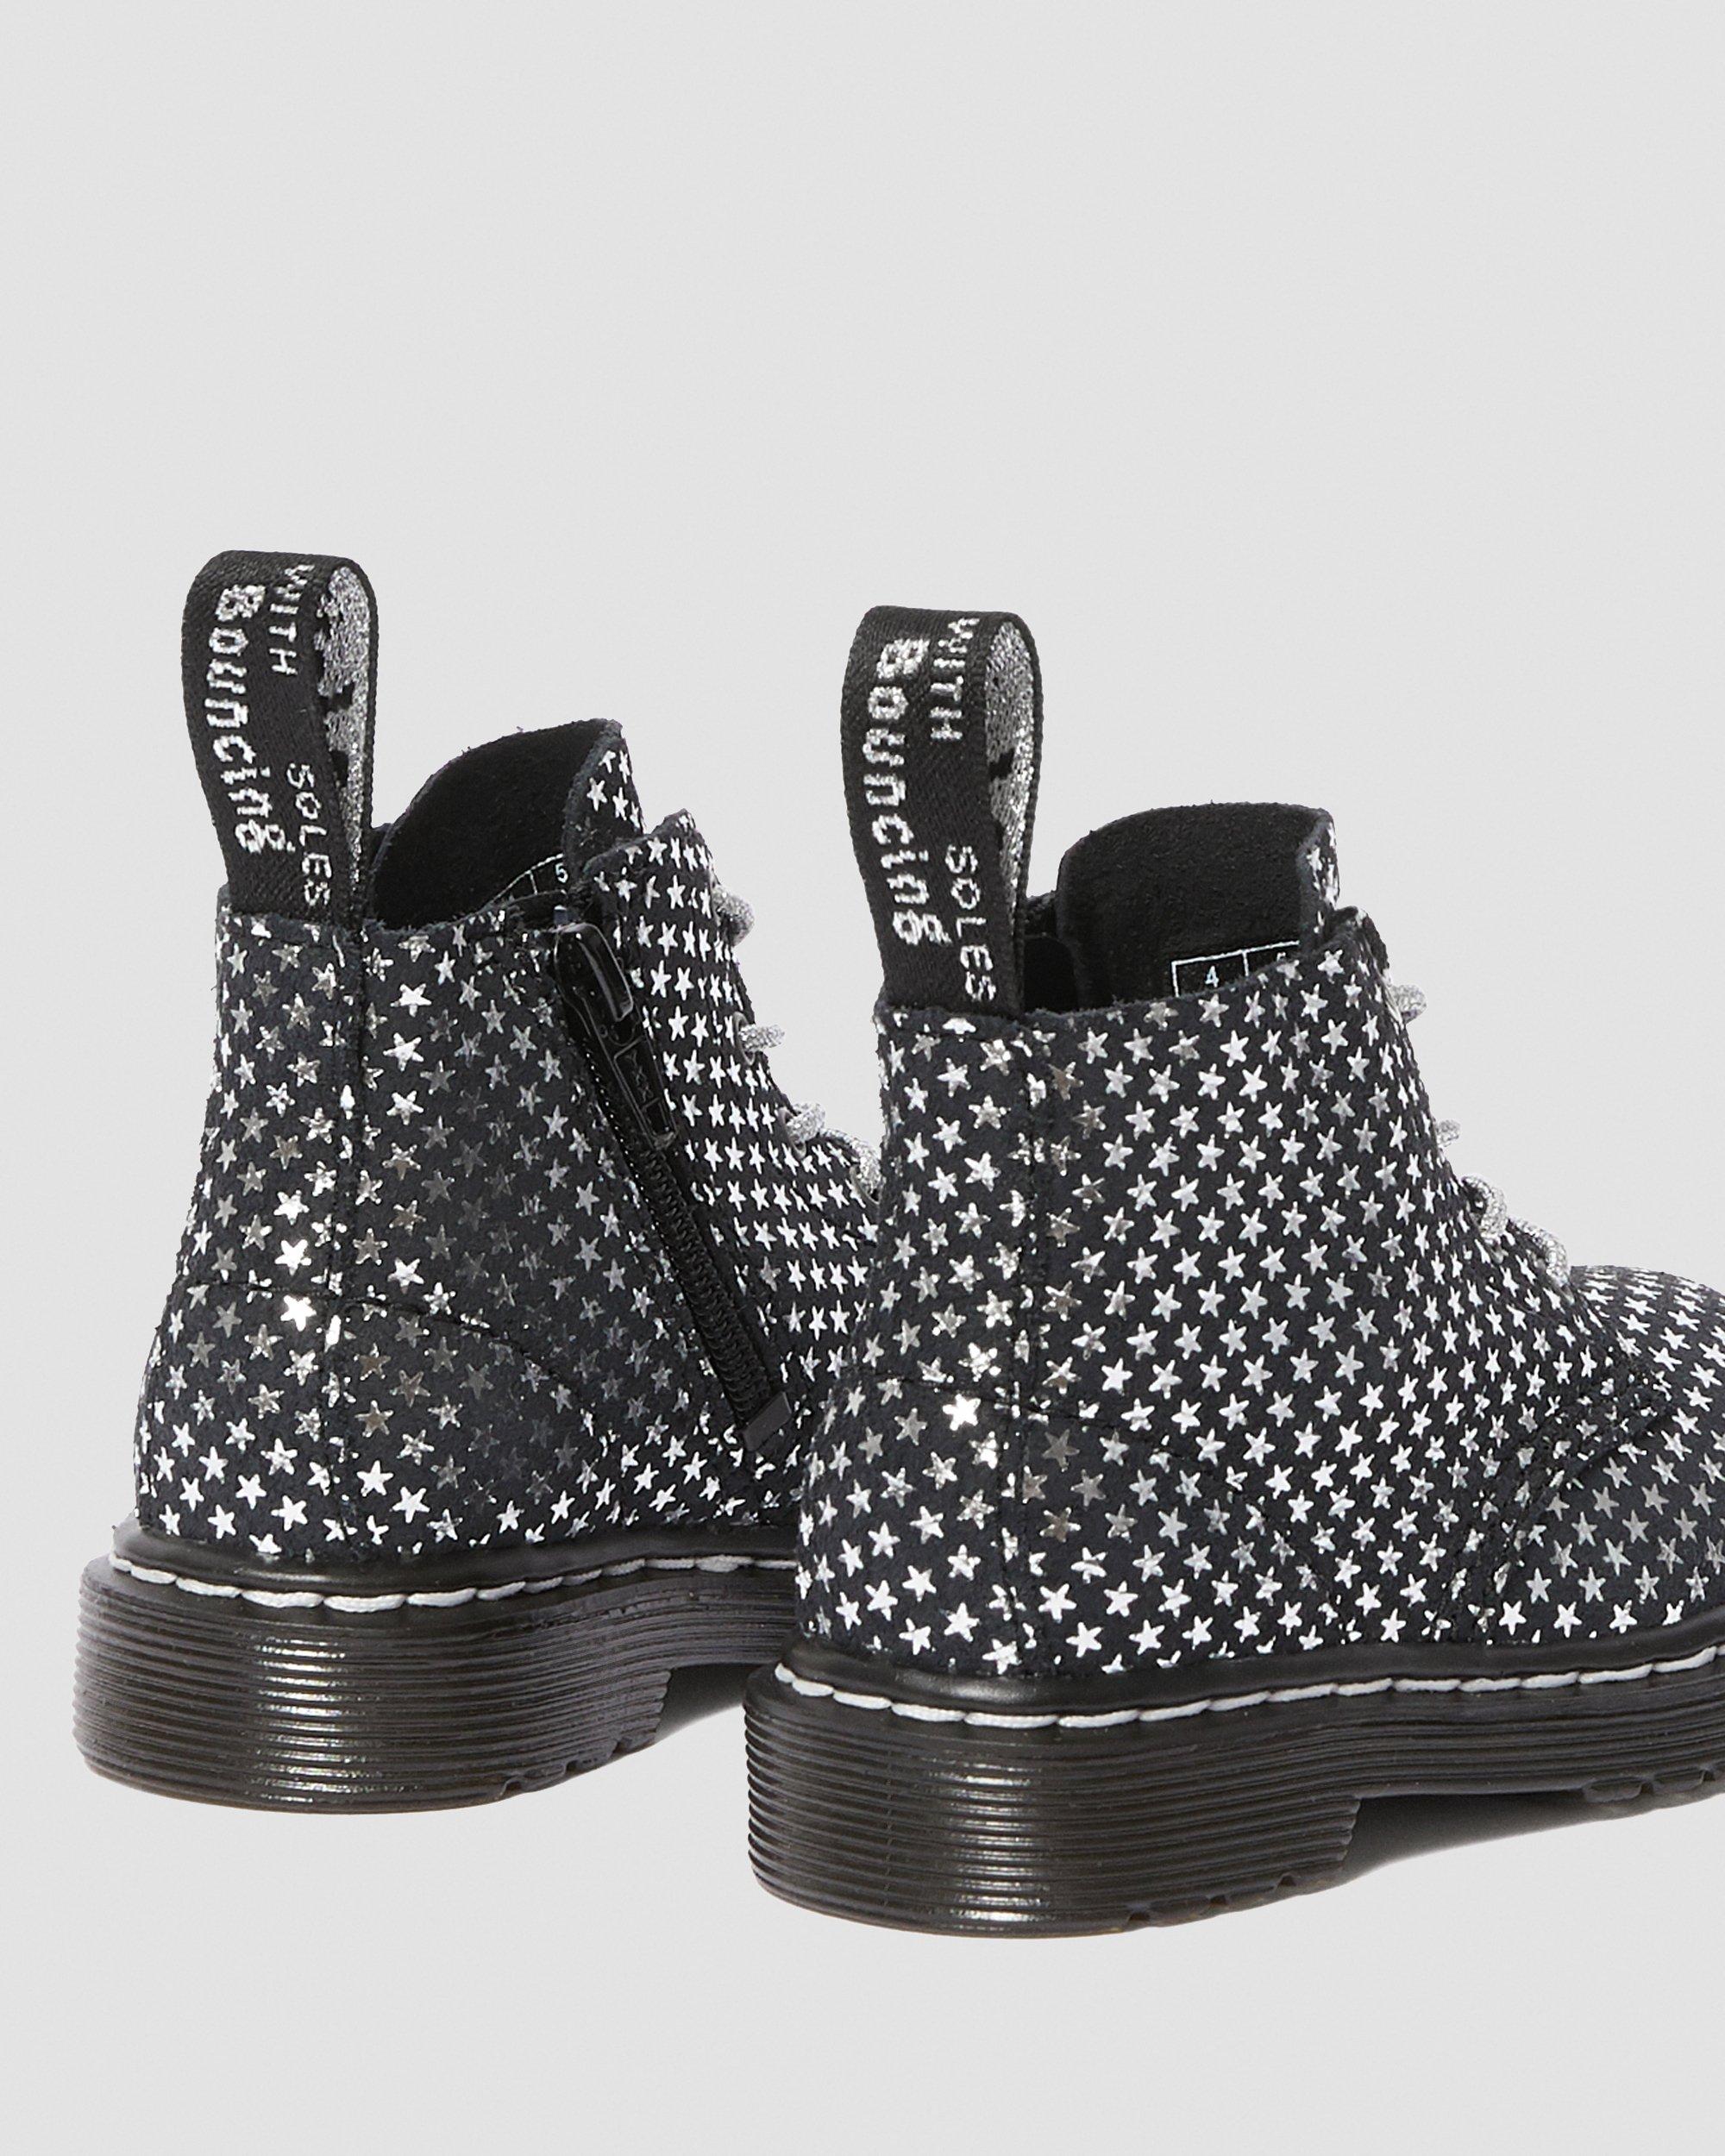 Infant 1460 Suede Metallic Star Boots in Black+Silver